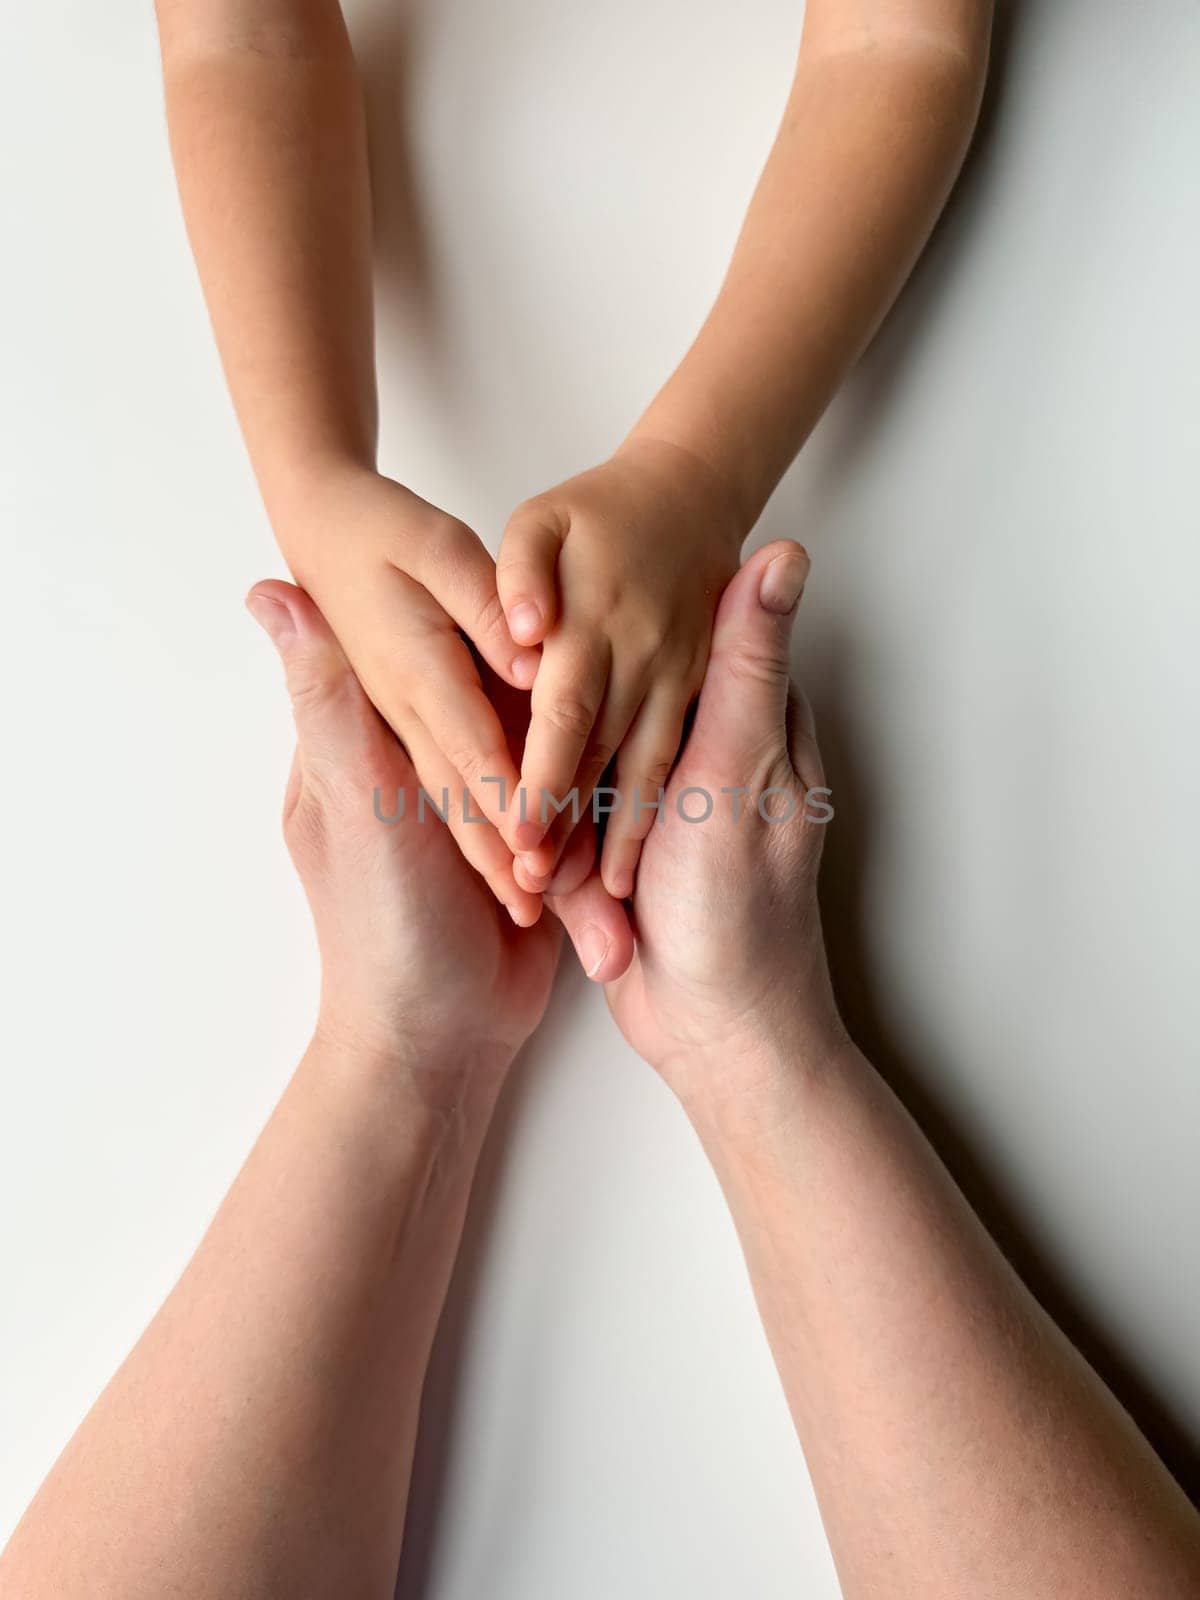 Mothers hands holding childs hands on white background. by Lunnica